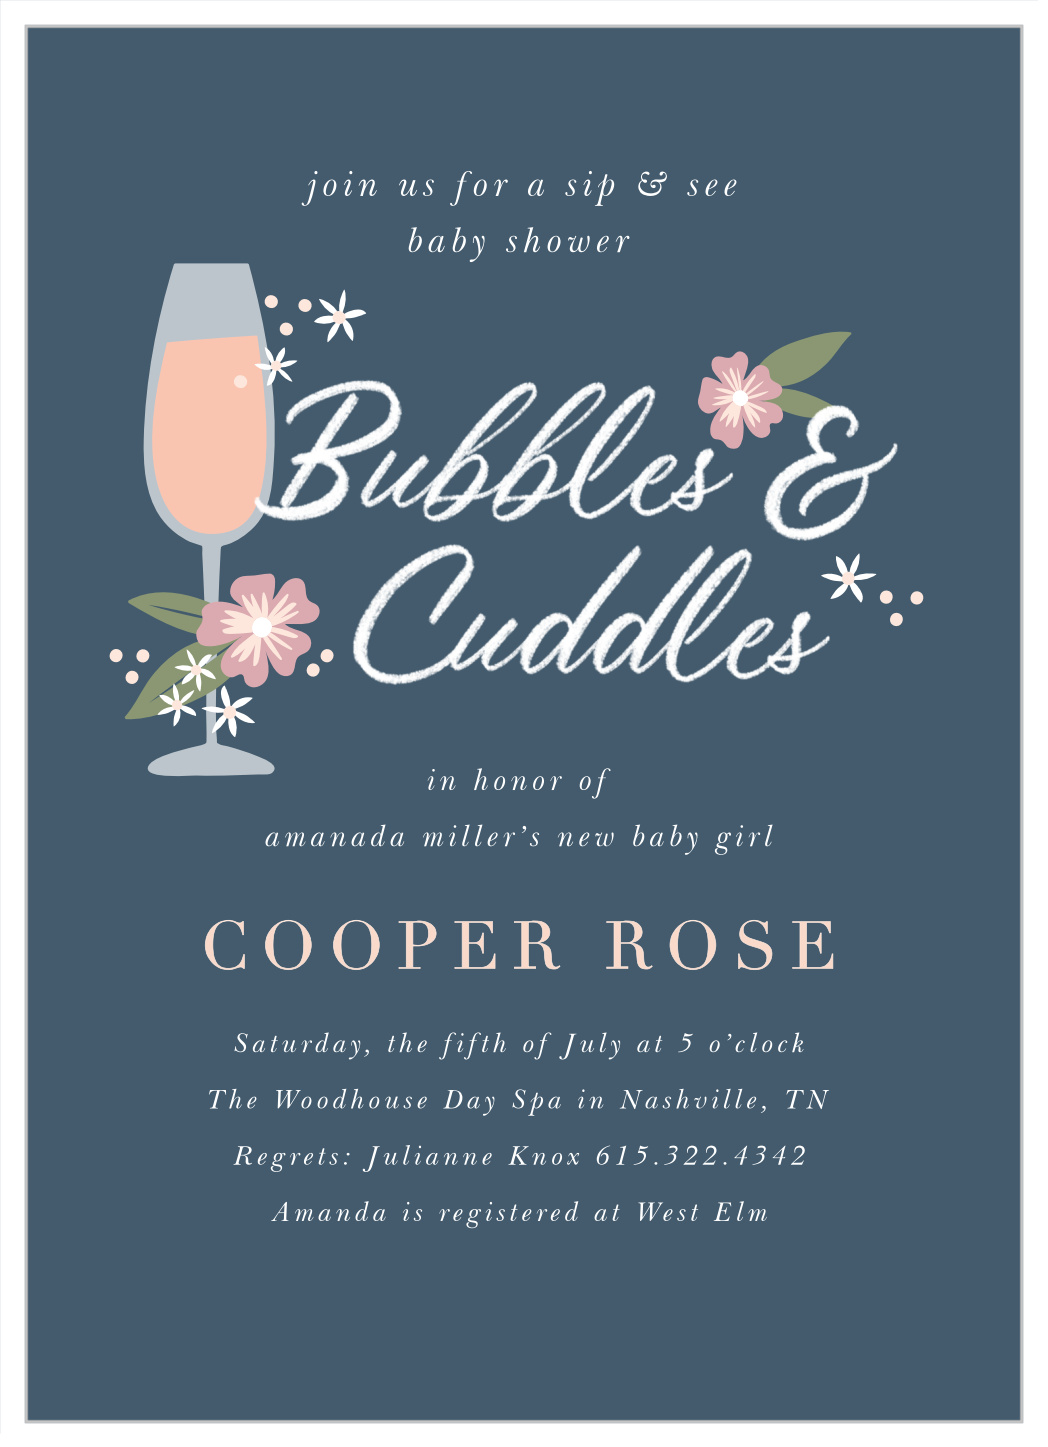 Bubbles & Cuddles Baby Shower Invitations